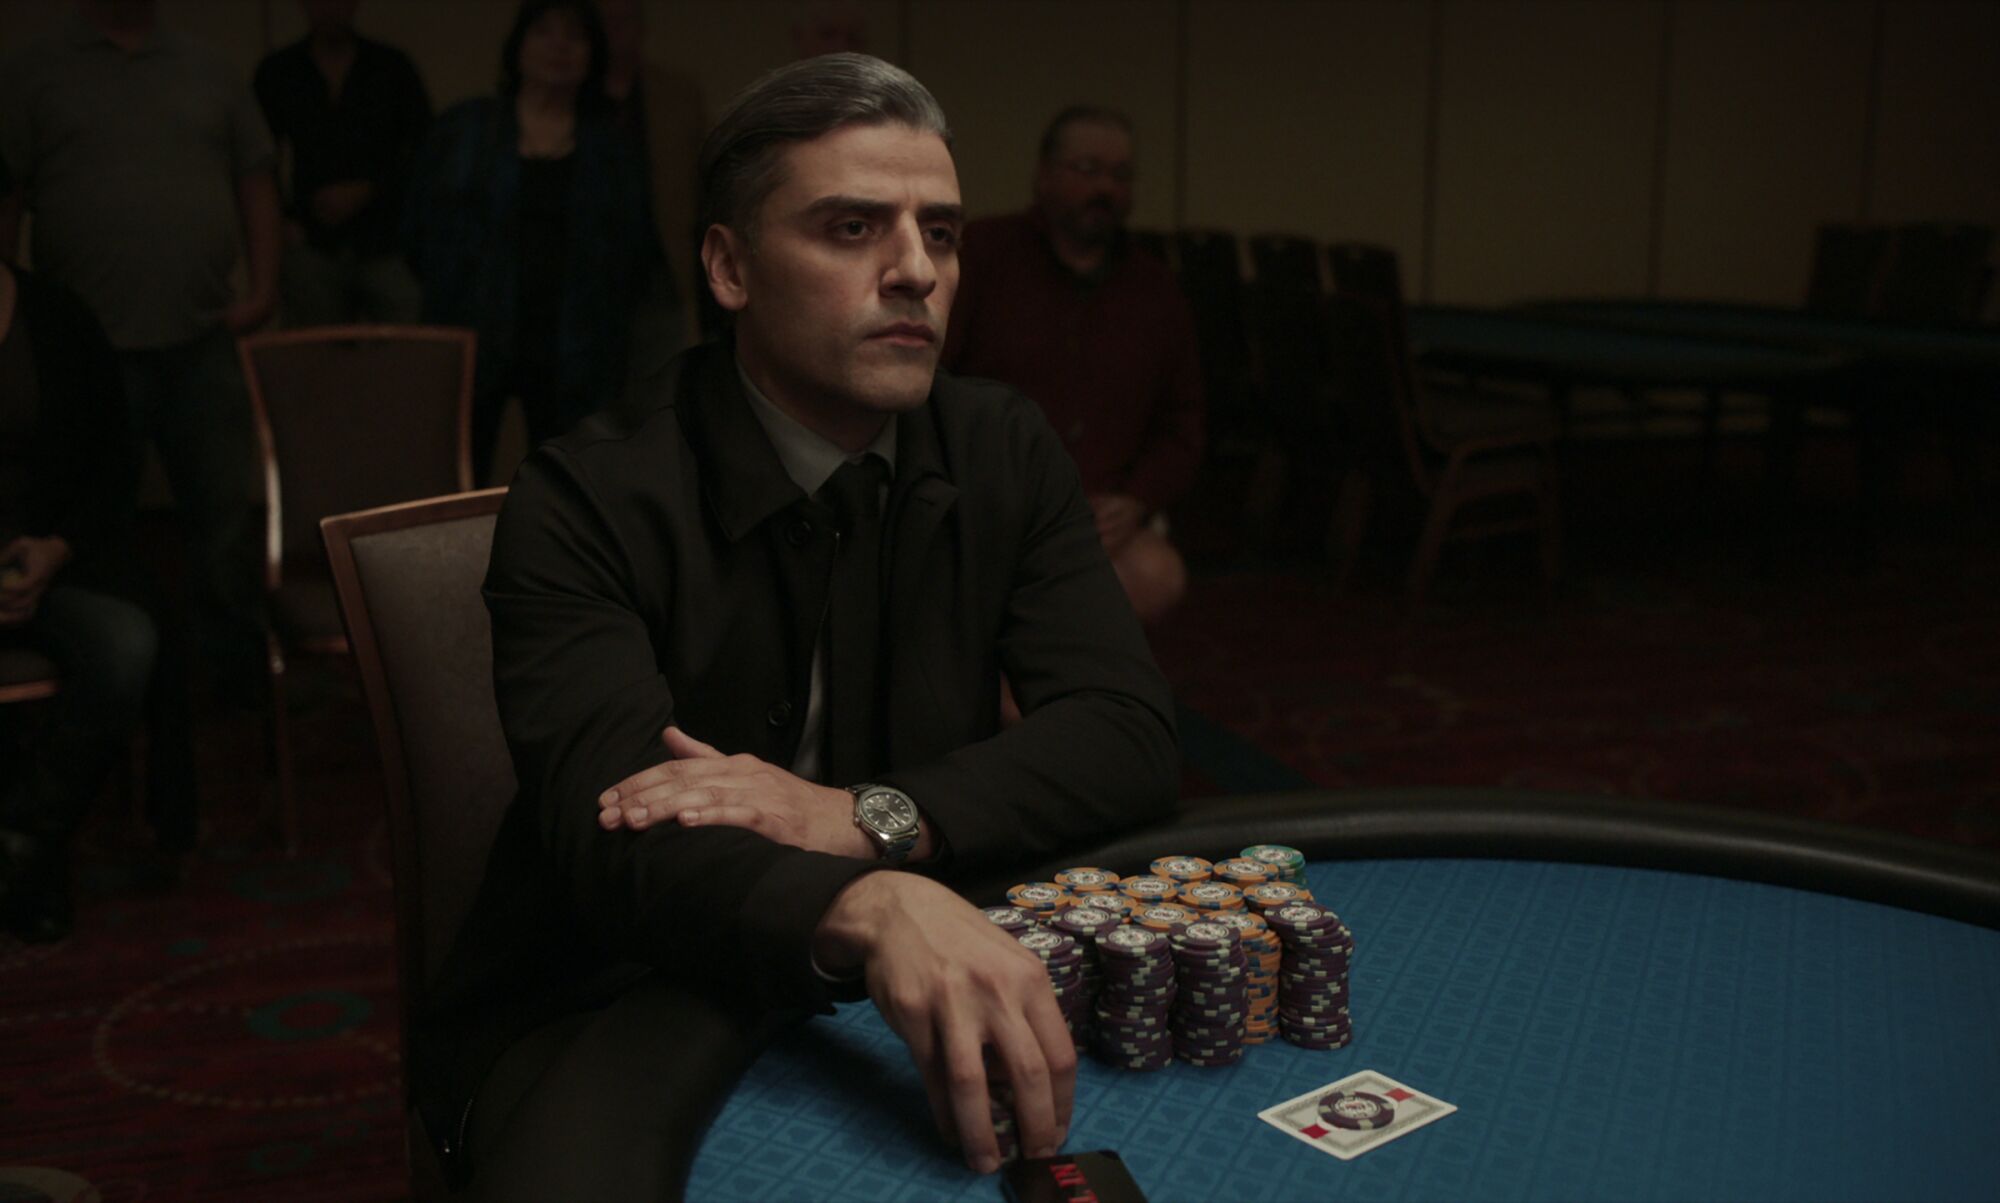 Oscar Isaac sits at a card table with stacks of chips in front of him.